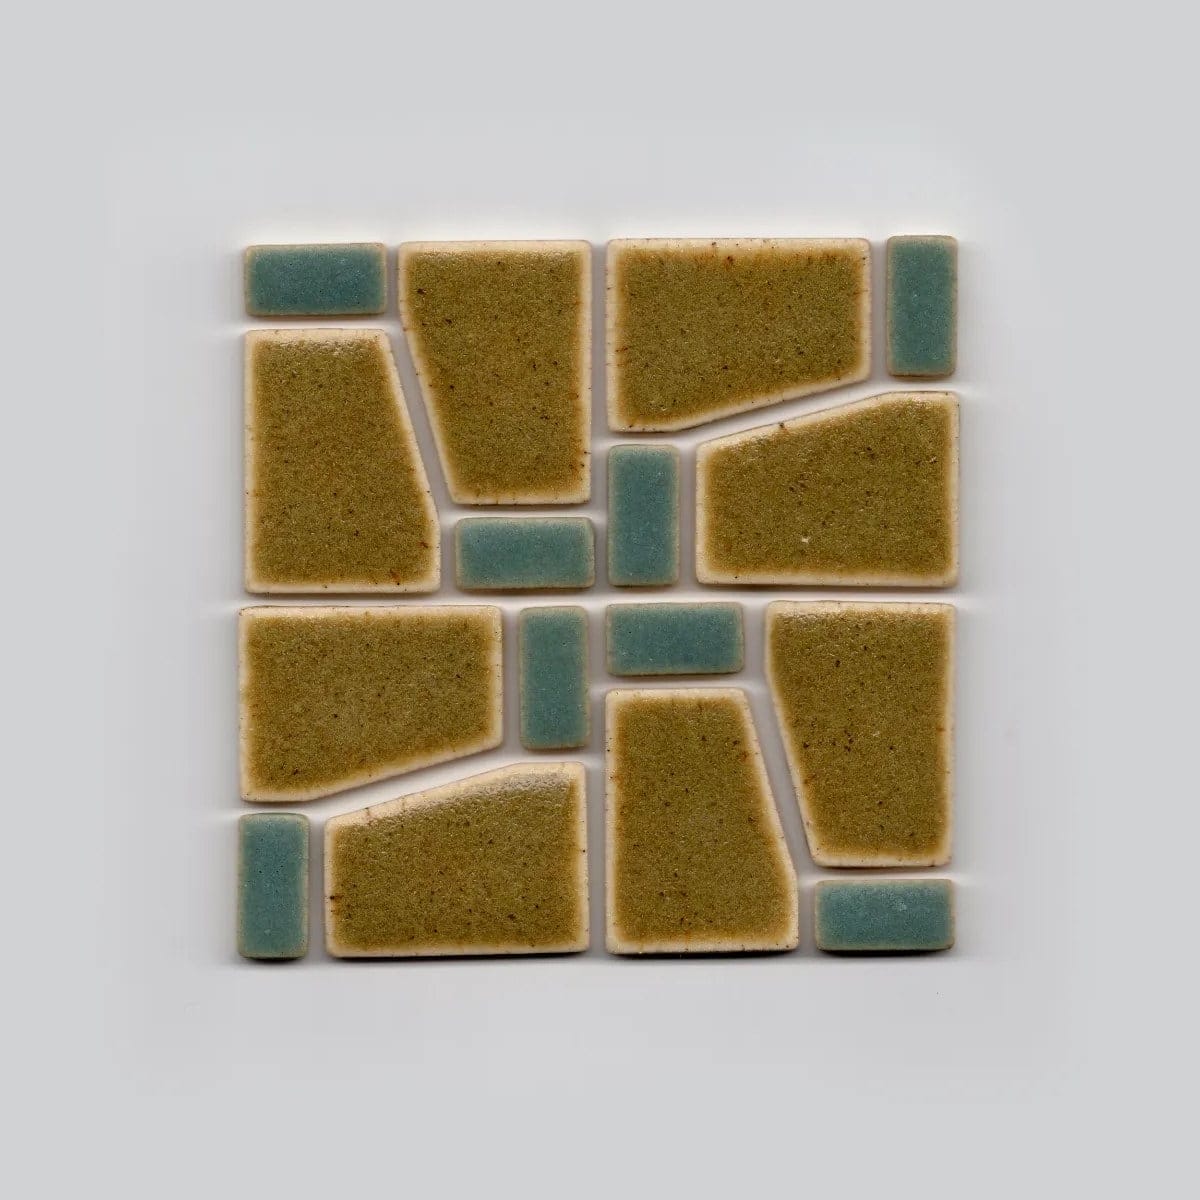 a square tile with brown and blue geometric components nested together